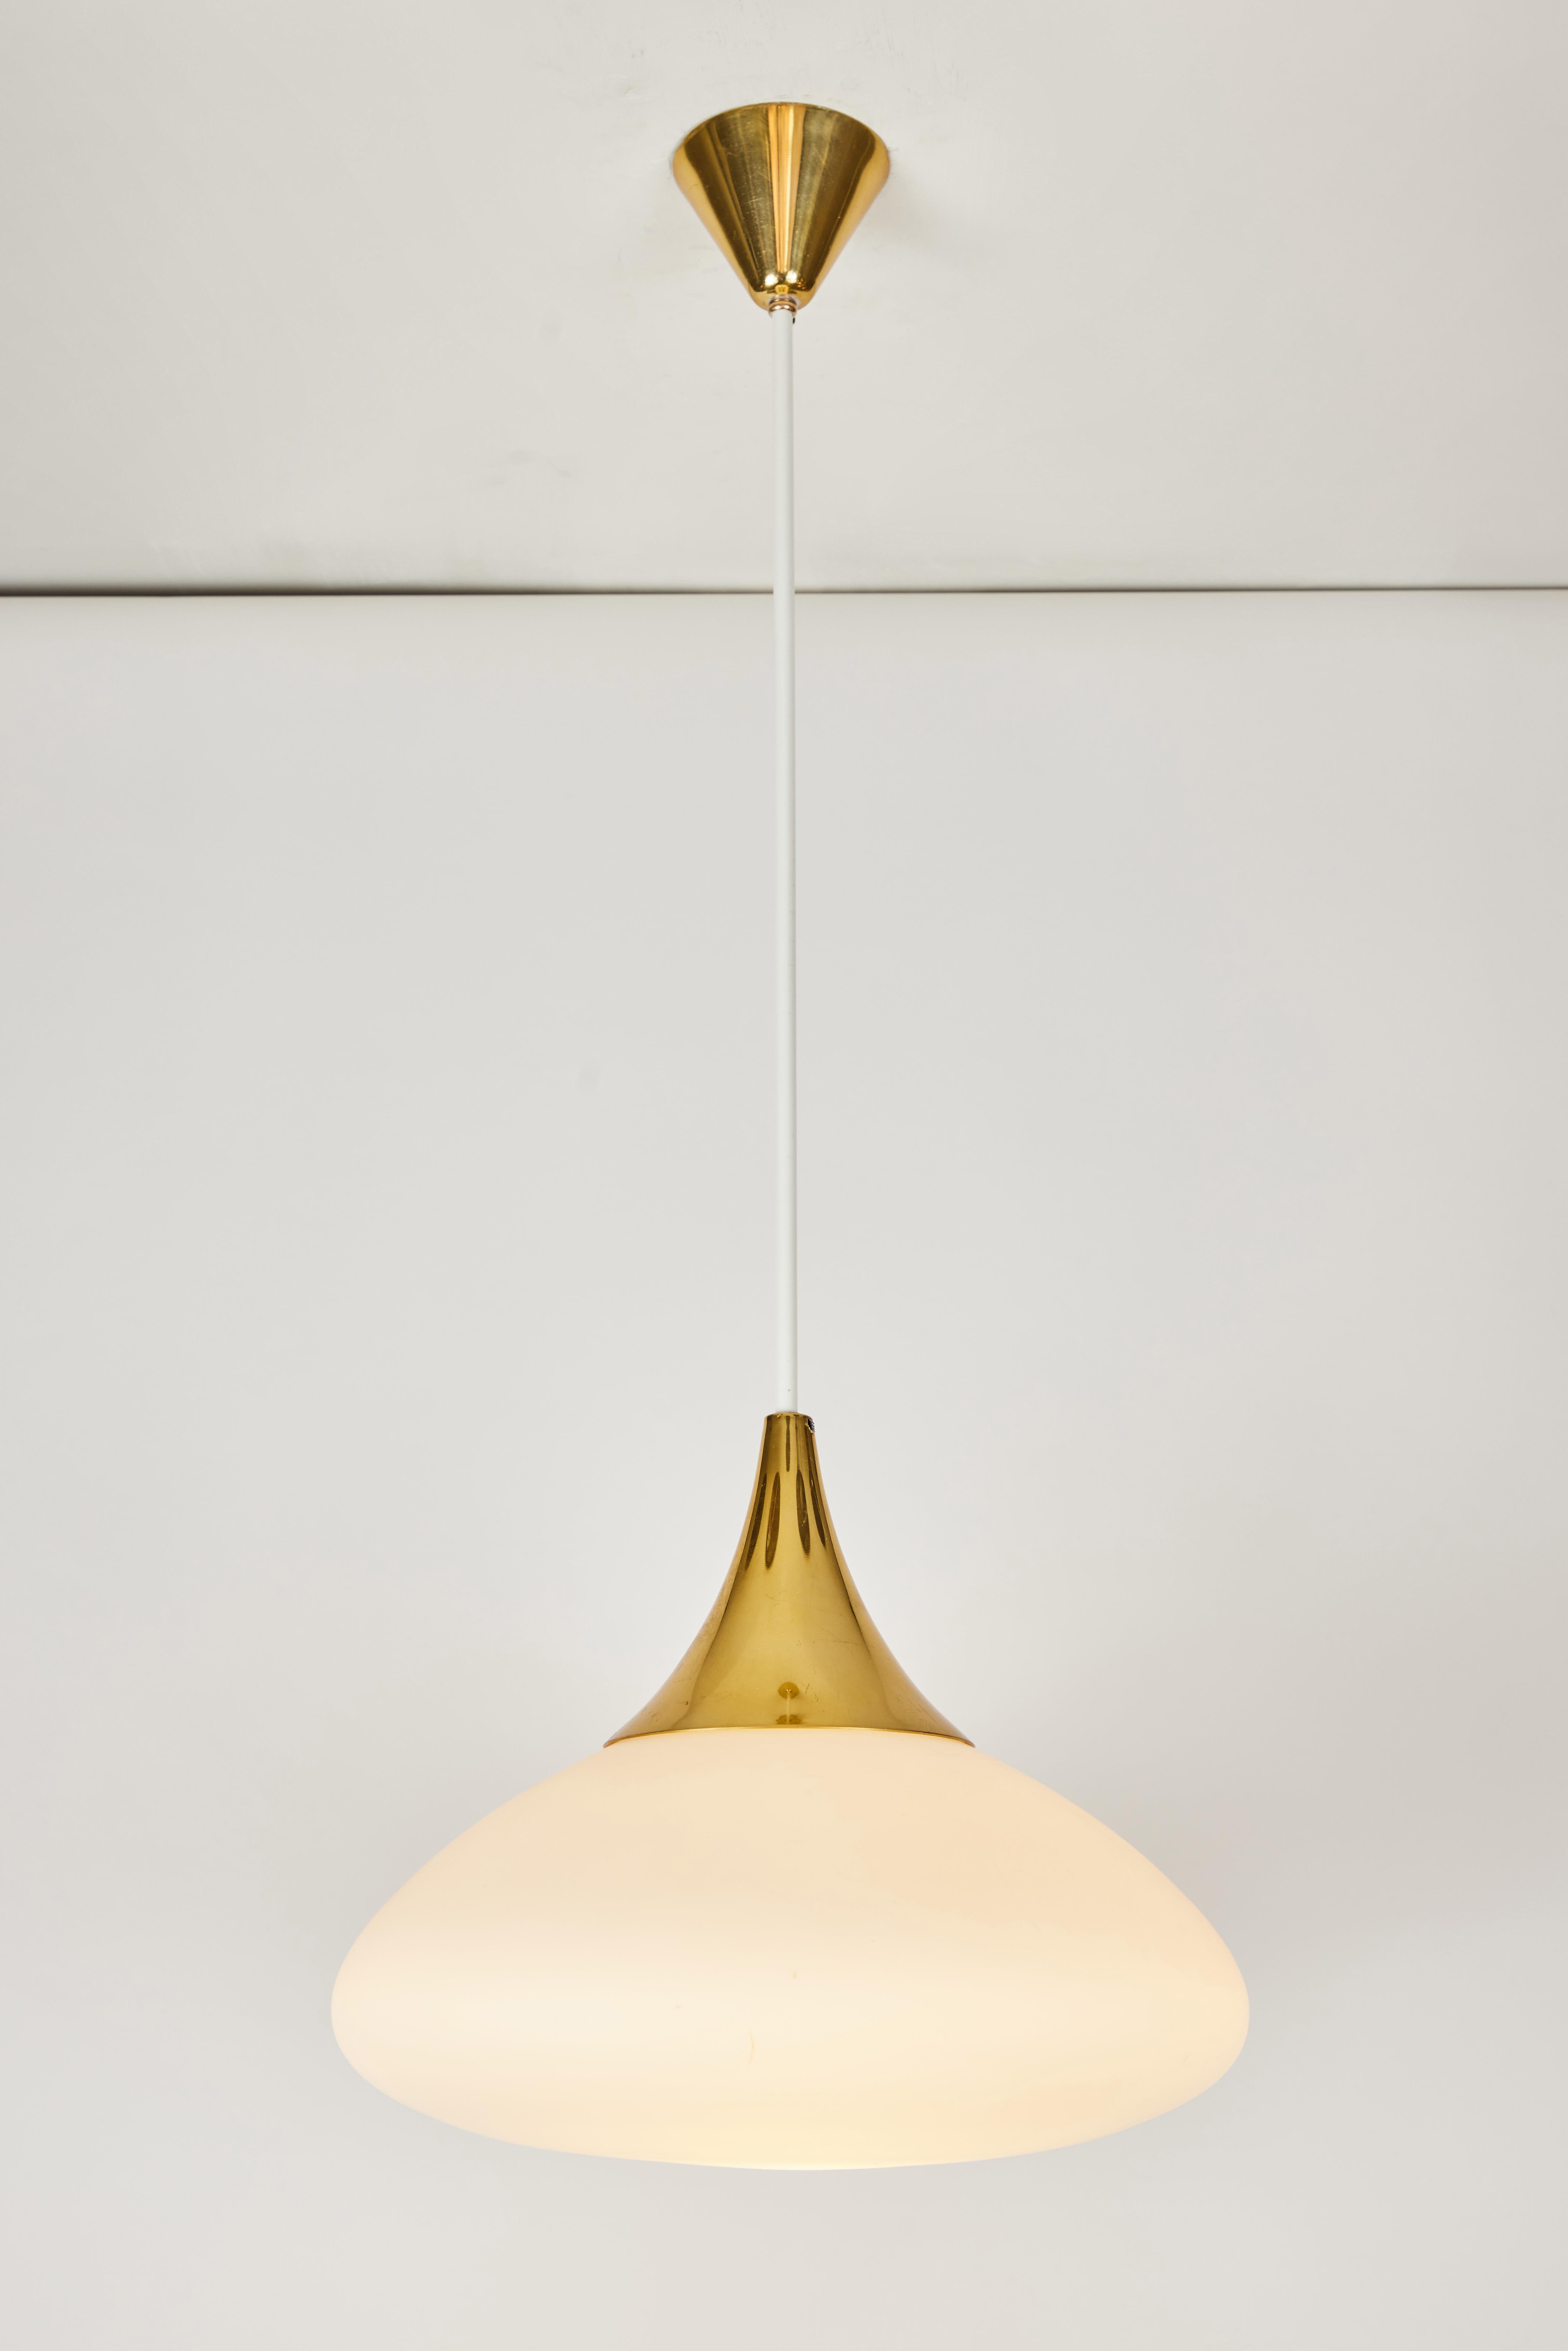 1950s Stilnovo glass and brass pendant. A quintessentially 1950s Italian design executed in matte finish opaline glass, painted metal and brass with original architectural ceiling canopy. A highly functional light sculpture of attractive scale and